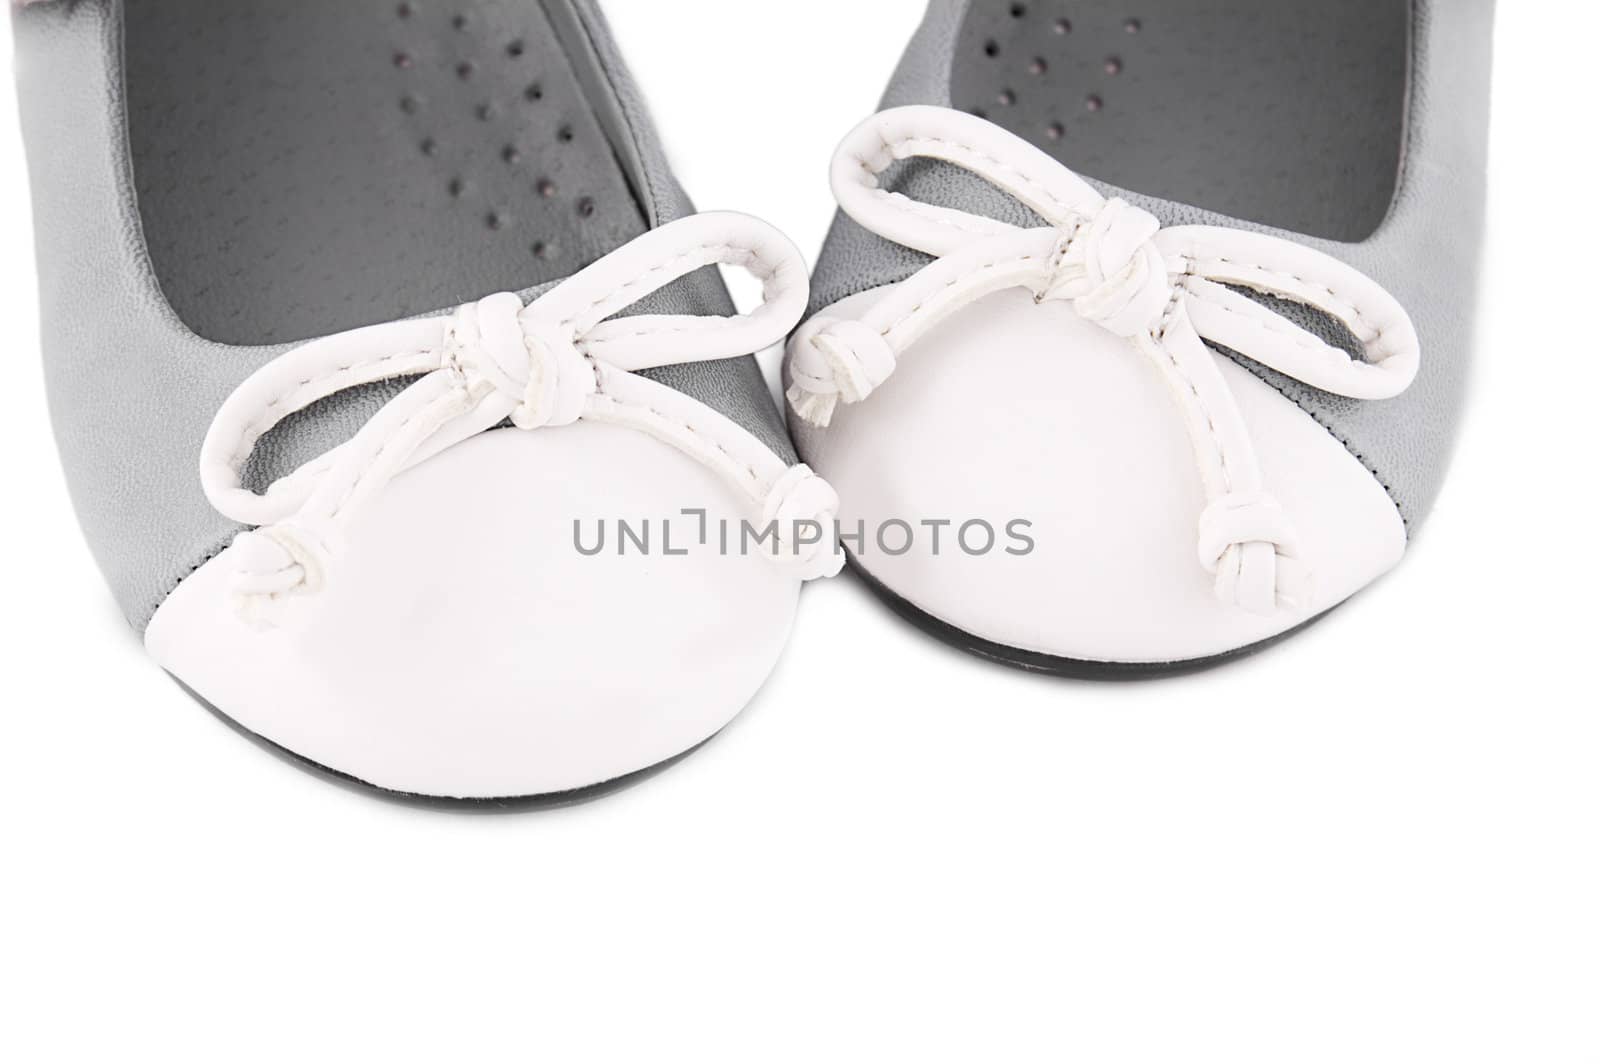 Pair of gray and white baby shoes with bows